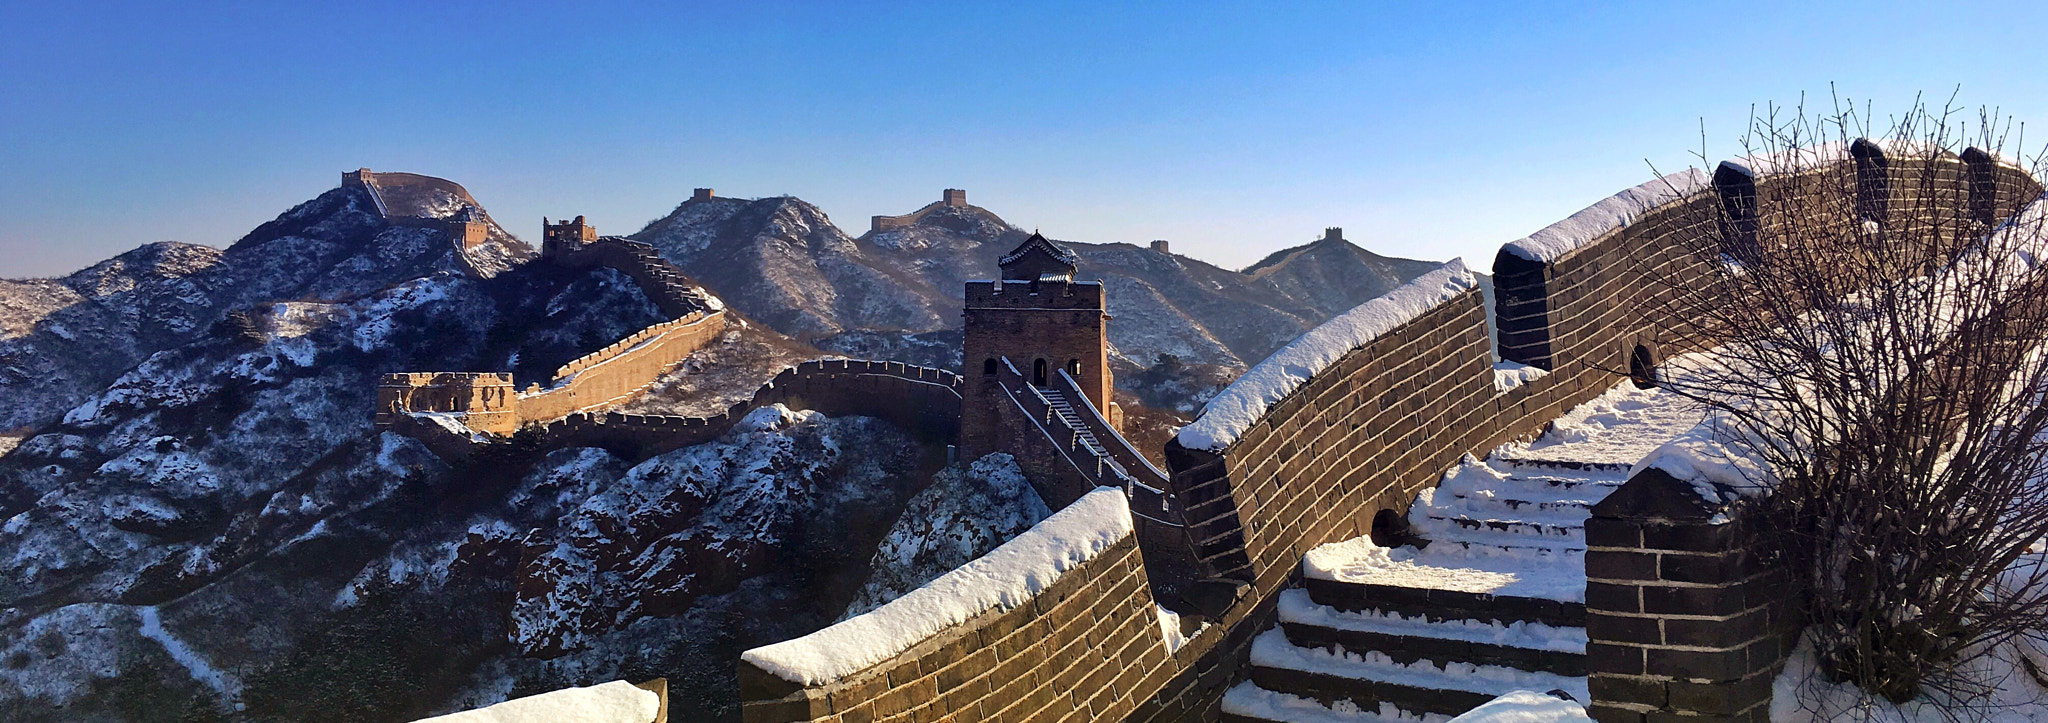 Jag.gr 645 PRO Mk III for iOS sample photo. The great wall photography